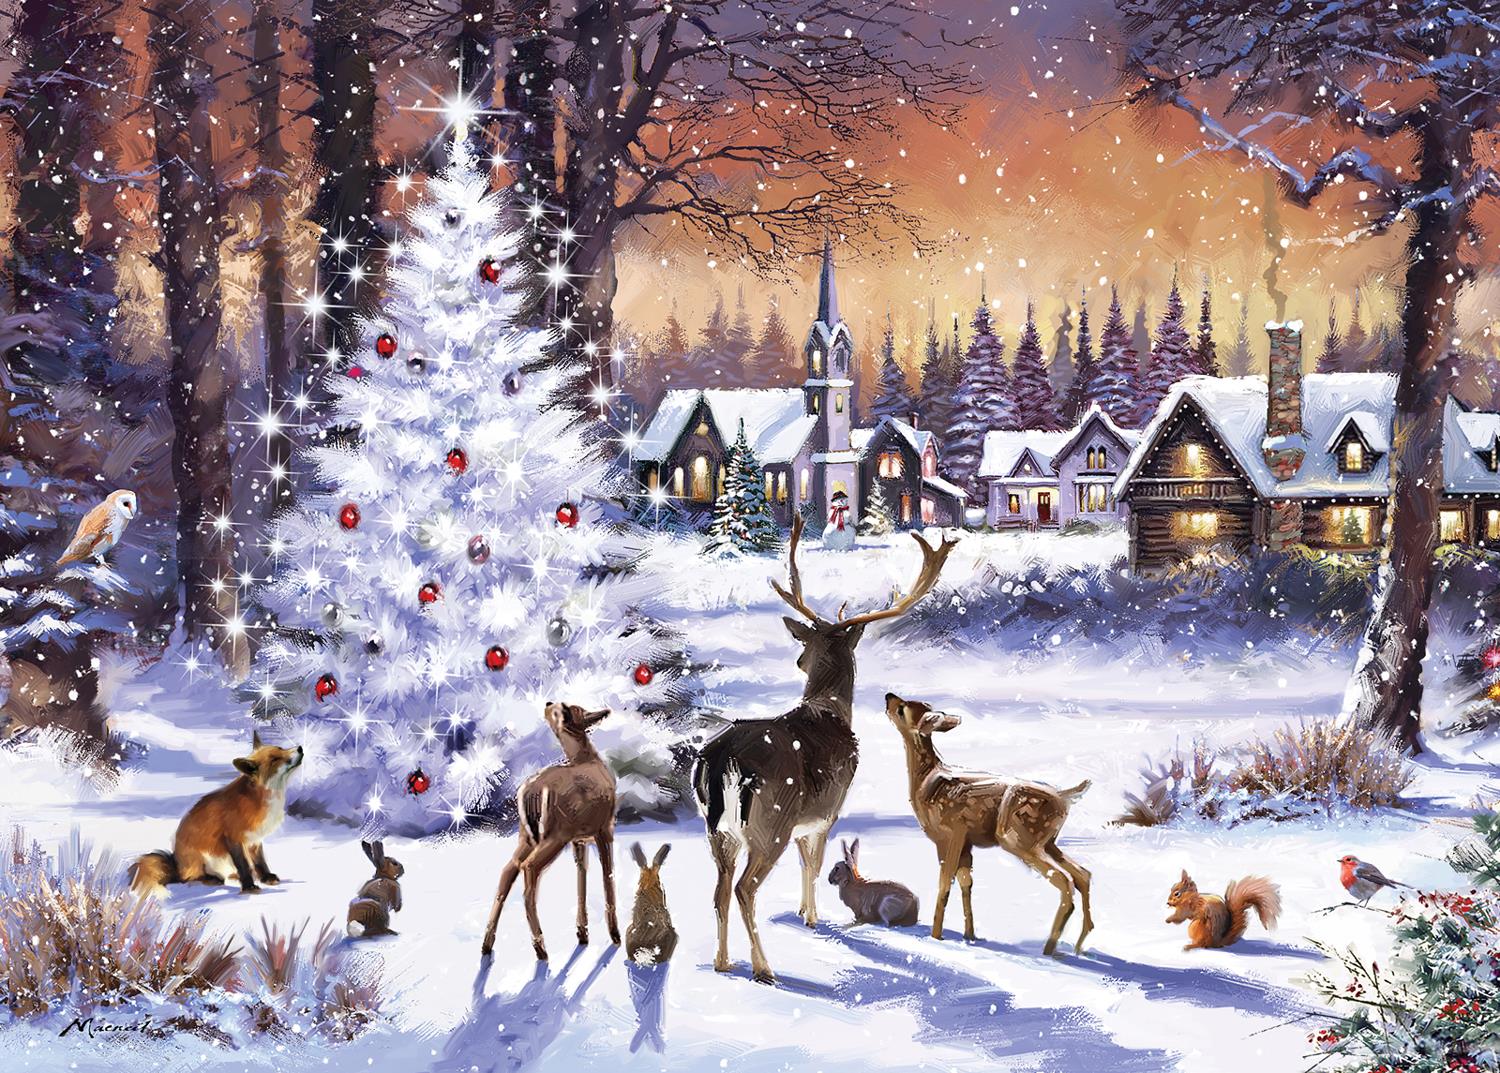 Otter House Christmas Gathering Jigsaw Puzzle (1000 Pieces)